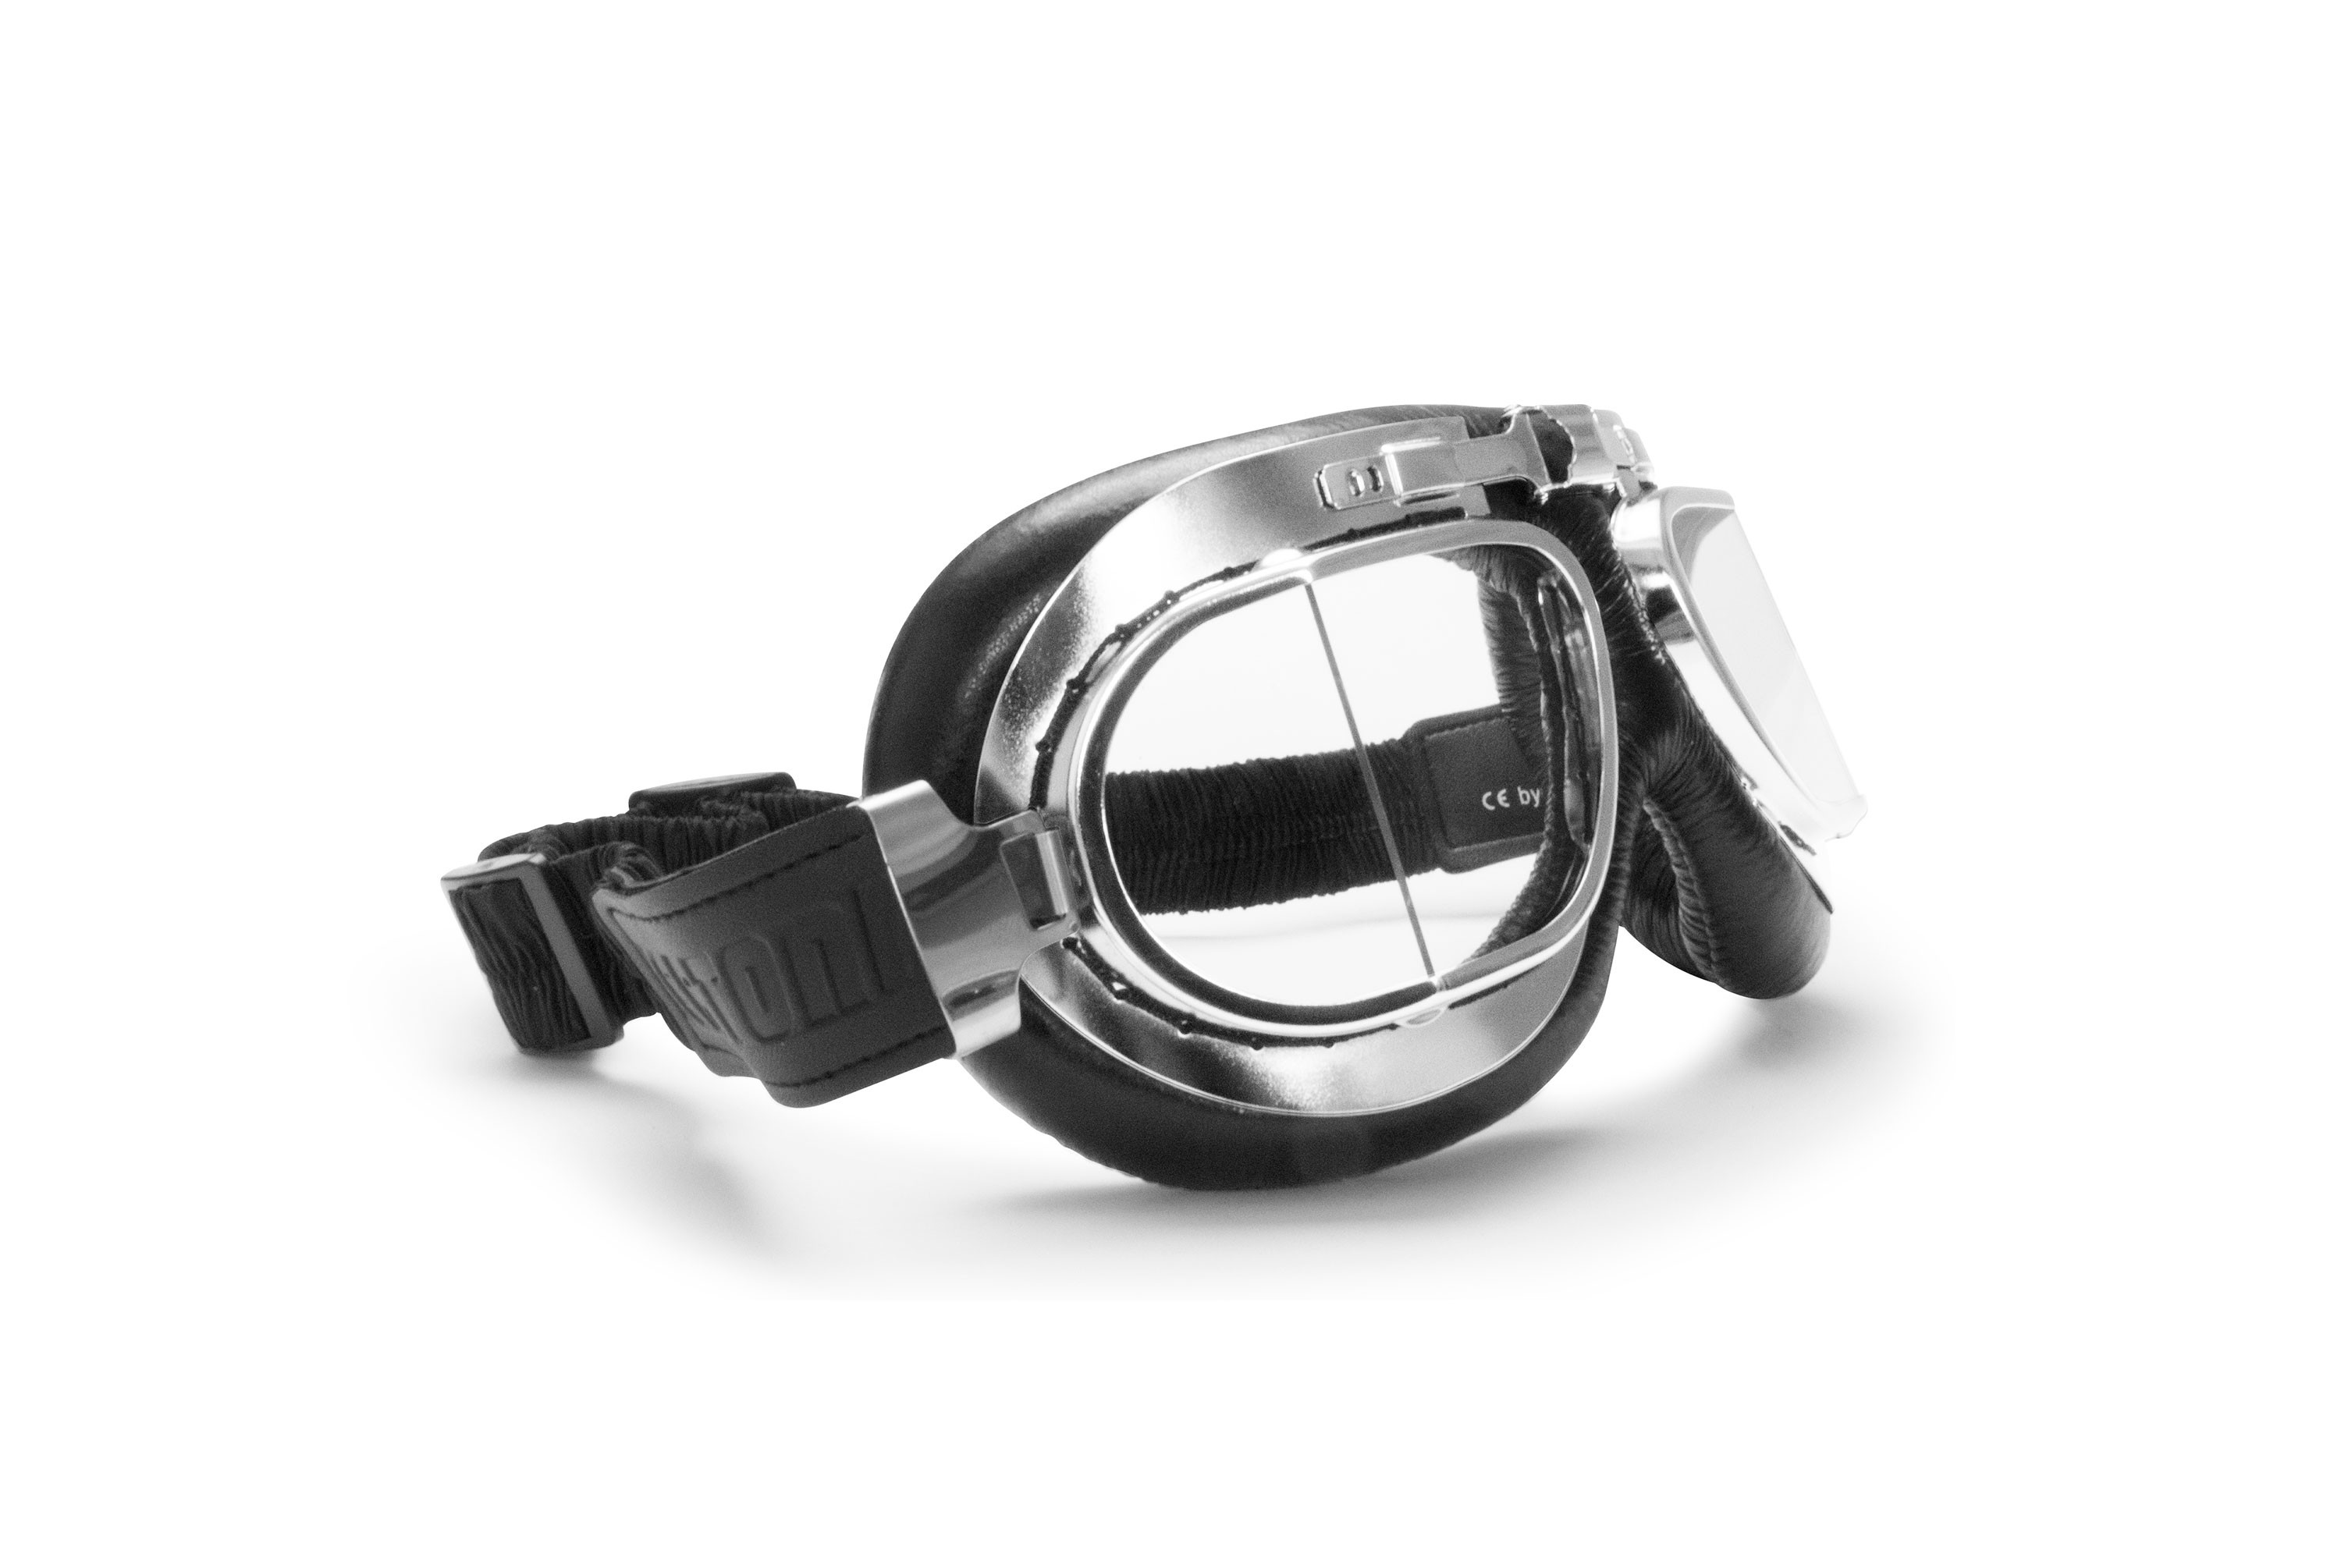 Vintage Motorcycle Goggles with Antifog and Anticrash Squared Lenses - Chrome Steel rim- by Bertoni Italy - AF193CR Black